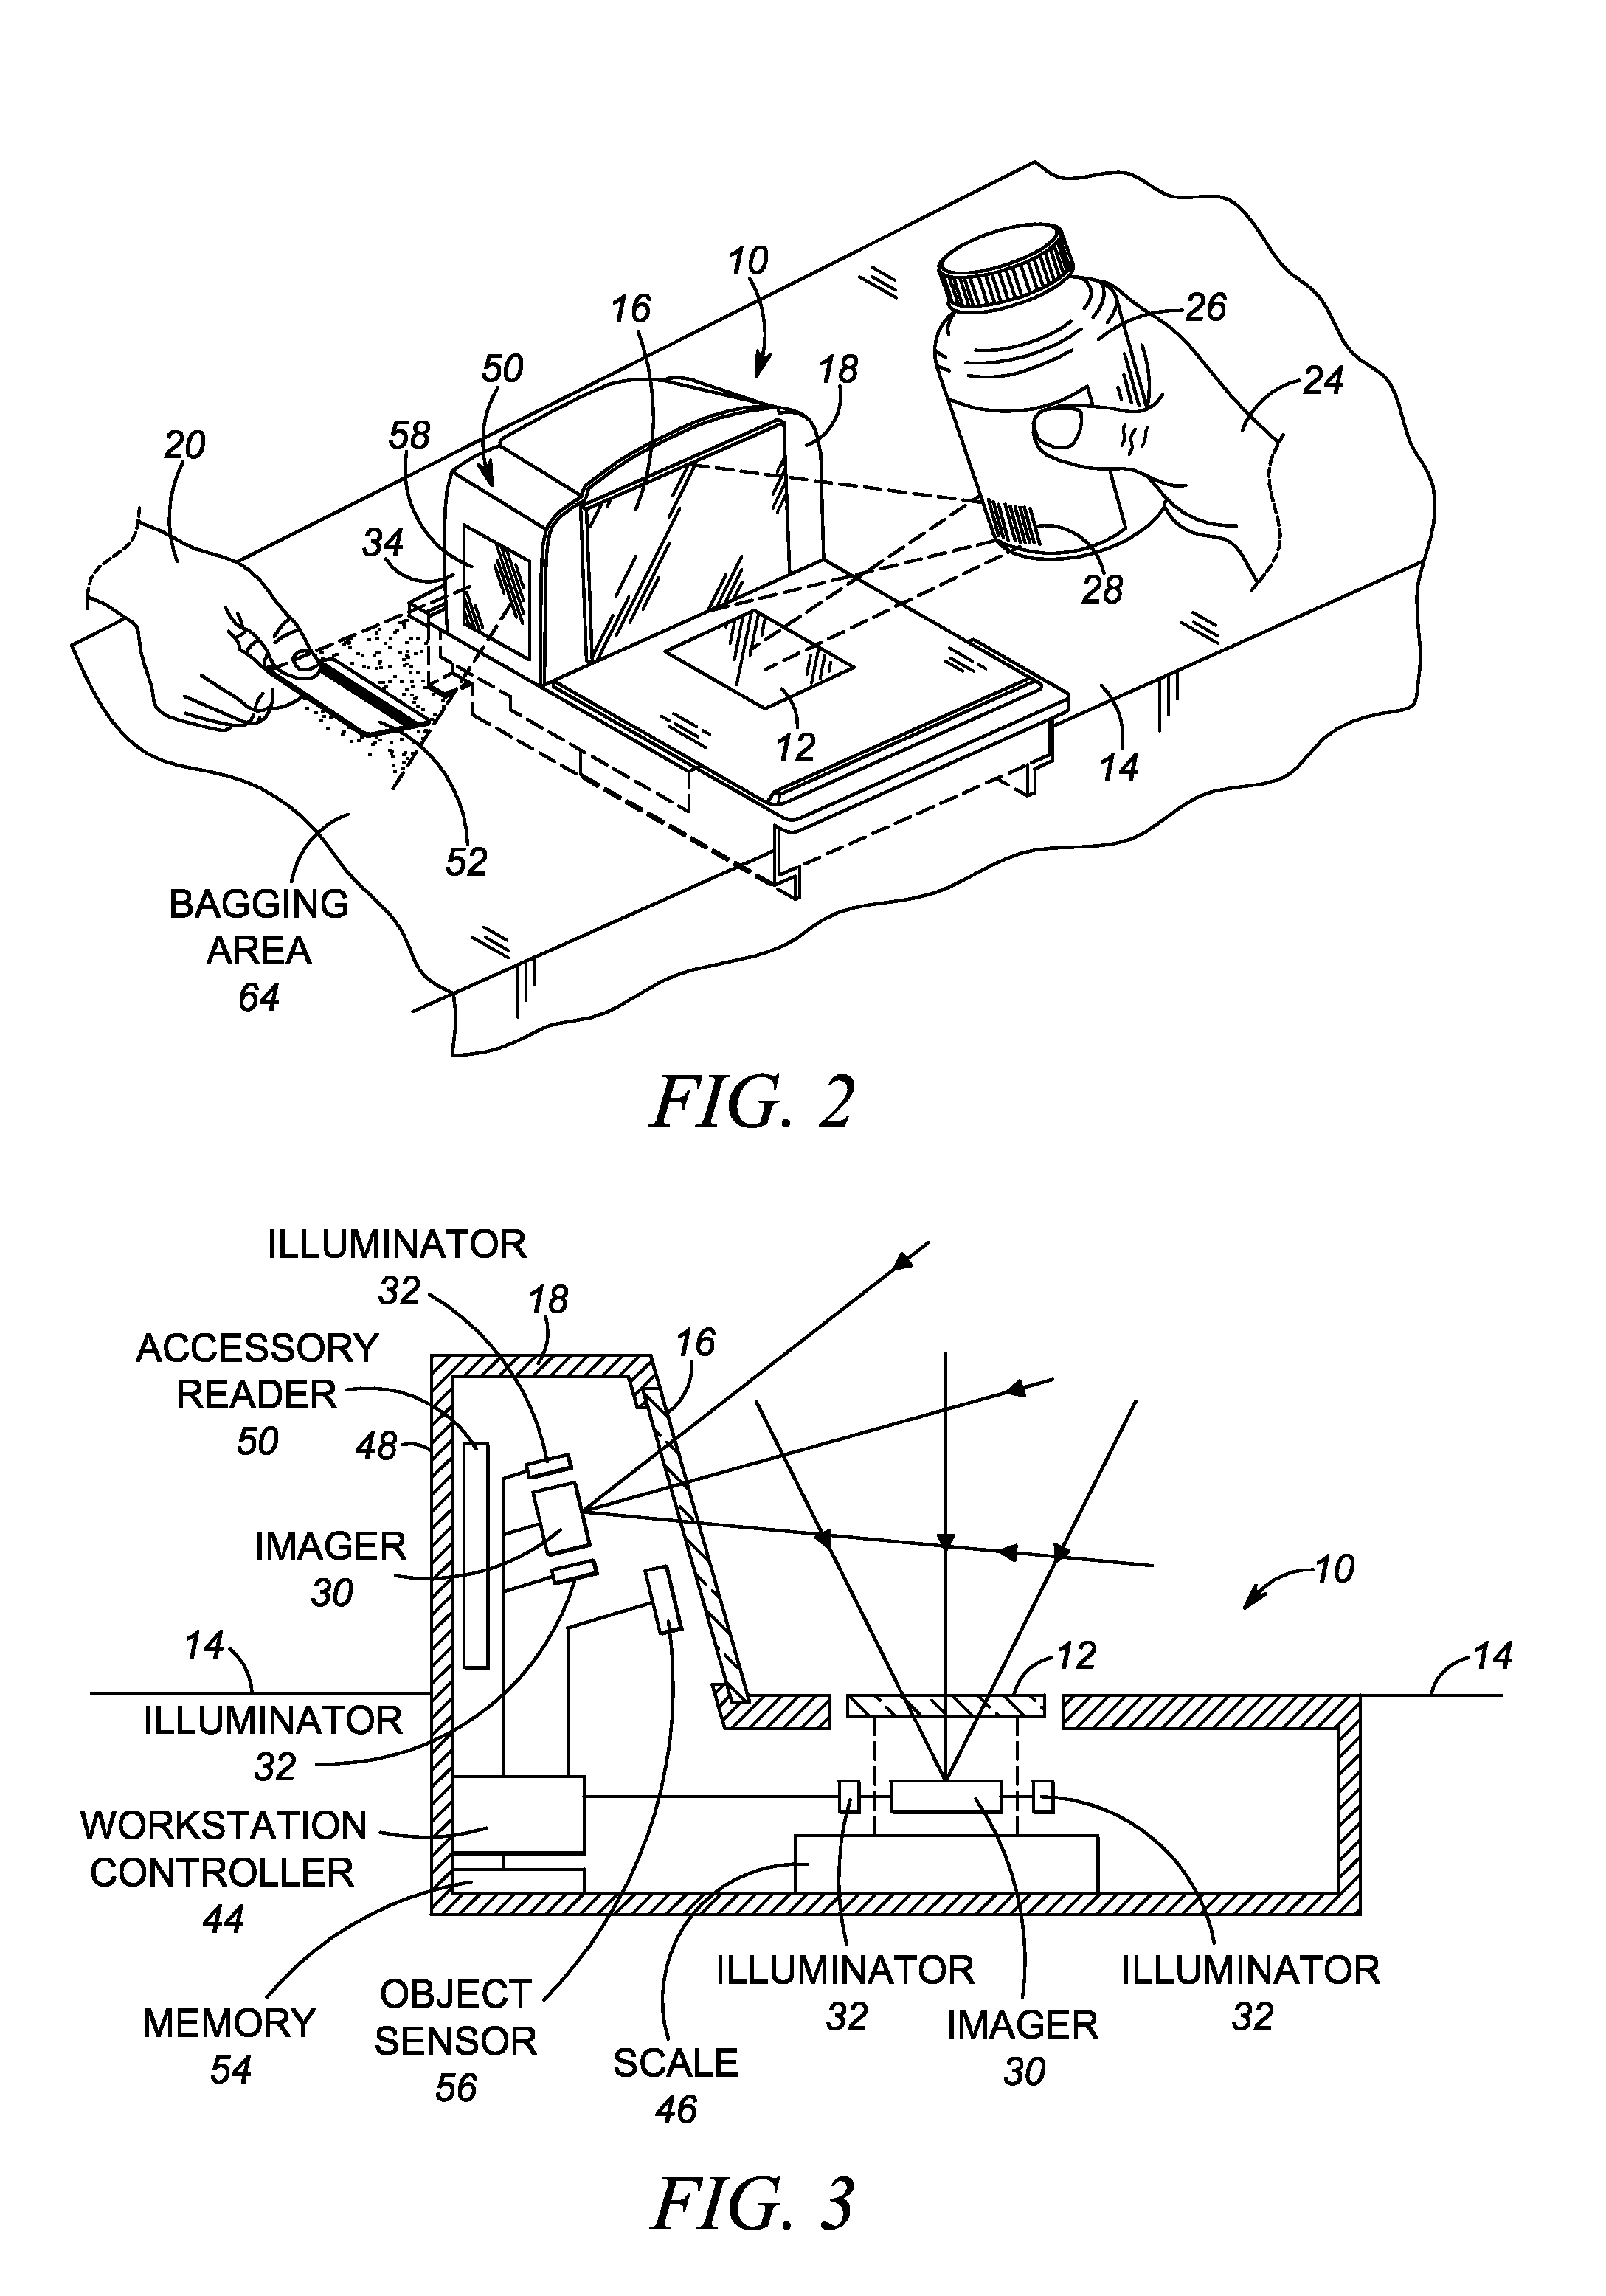 Checkout system for and method of preventing a customer-operated accessory reader facing a bagging area from imaging targets on products passed through a clerk-operated workstation to the bagging area